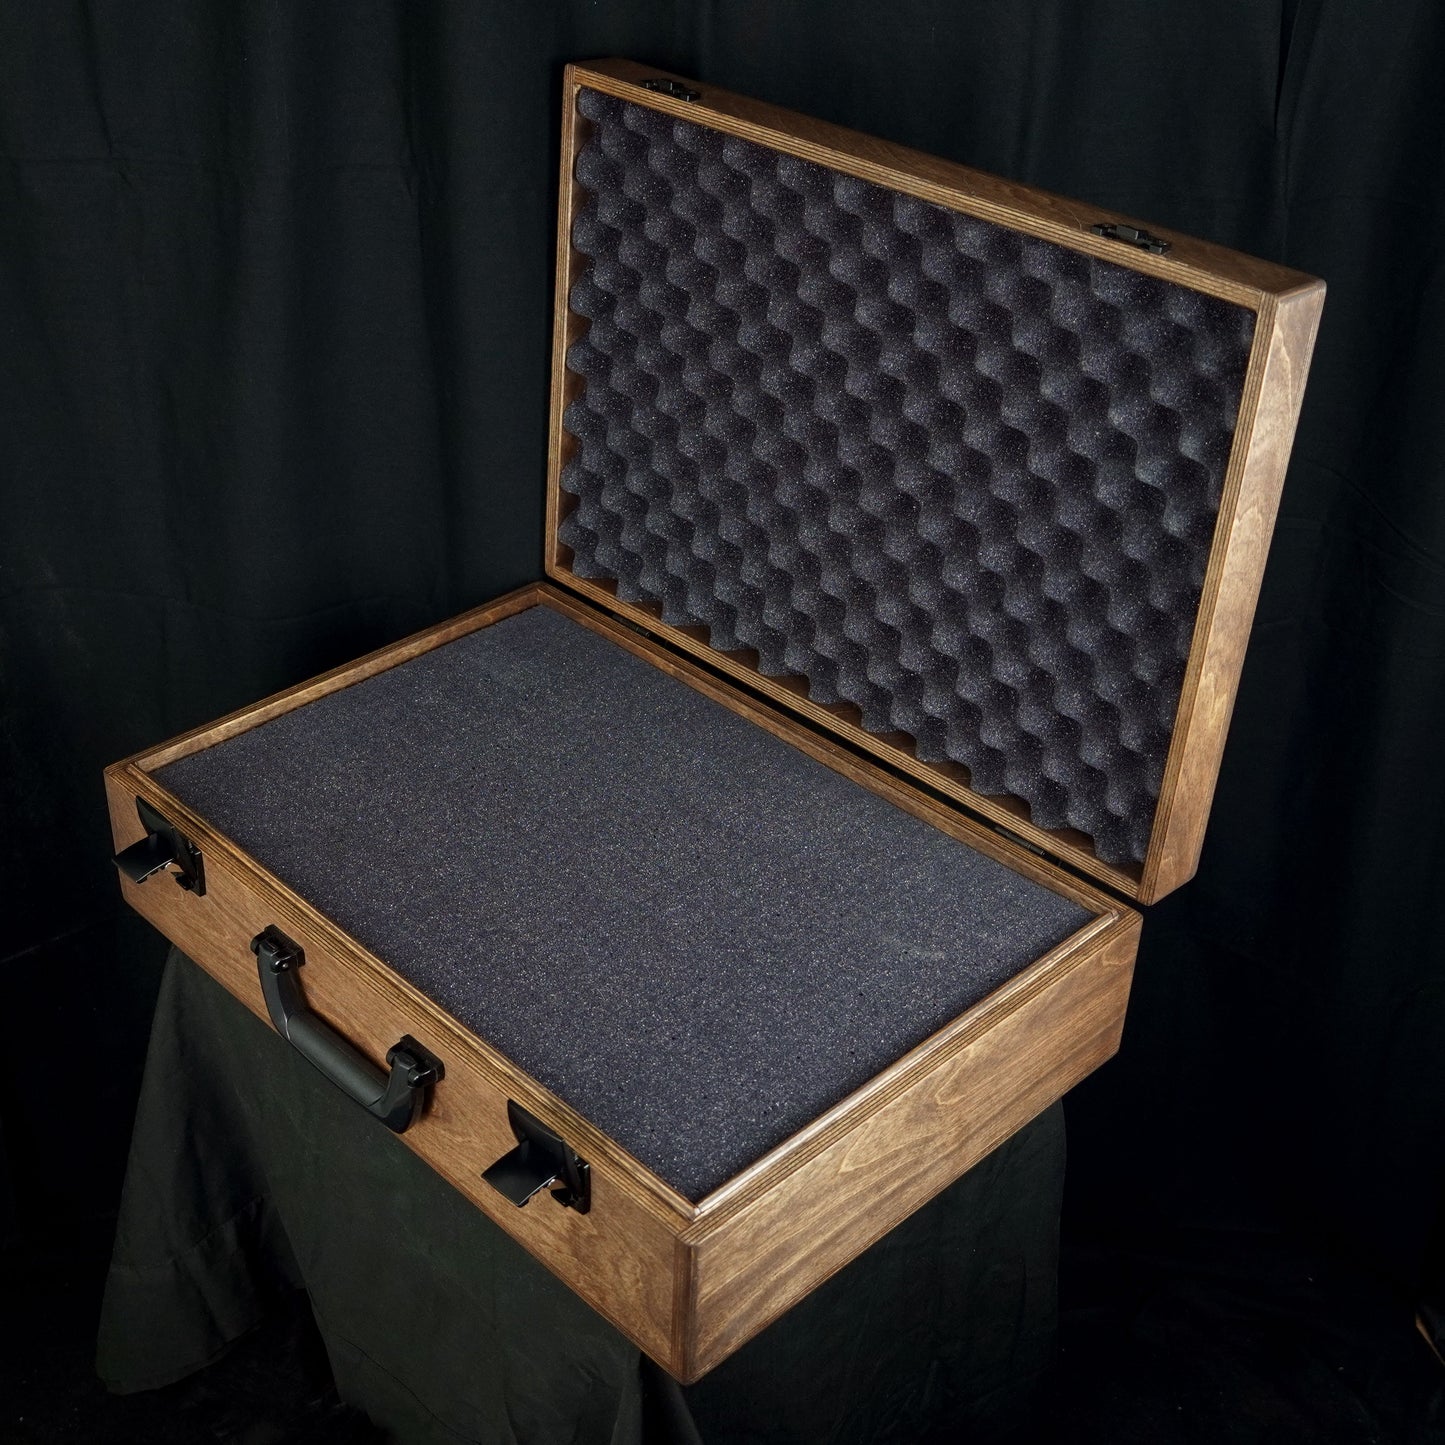 Extra Large Pick and Pluck Case